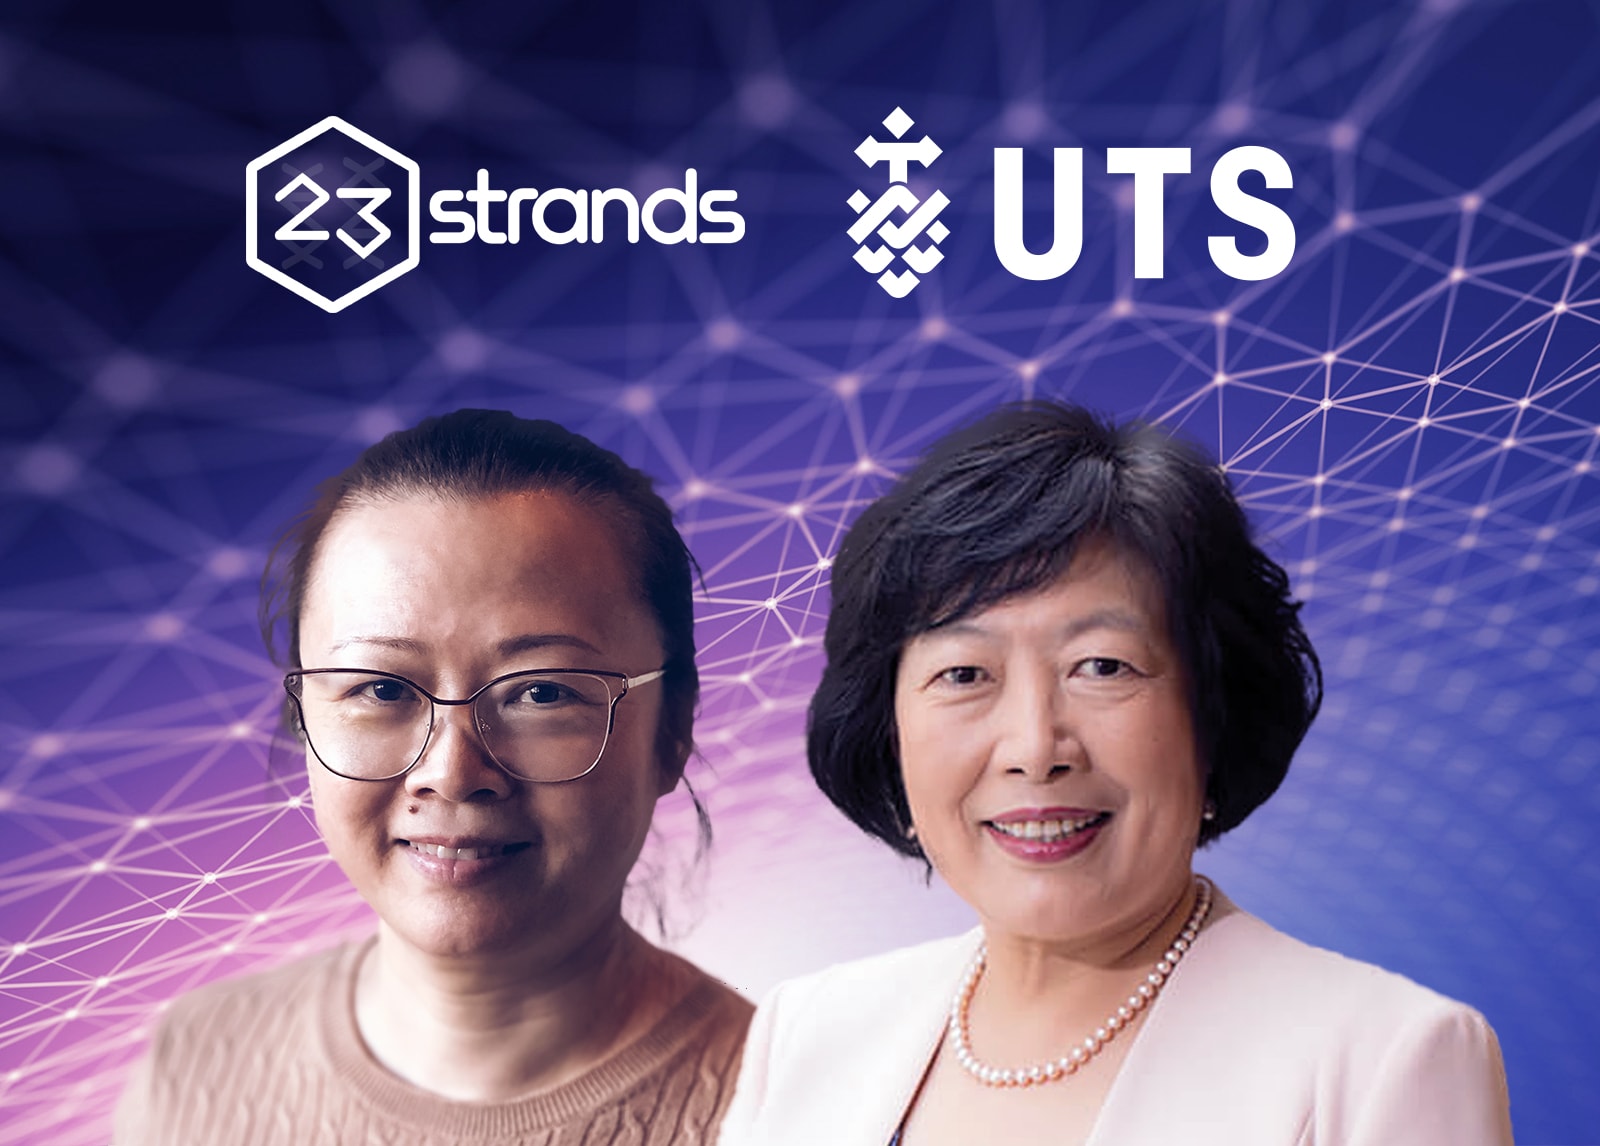 23Strands and UTS team up to research into how genomics can benefit from artificial intelligence.